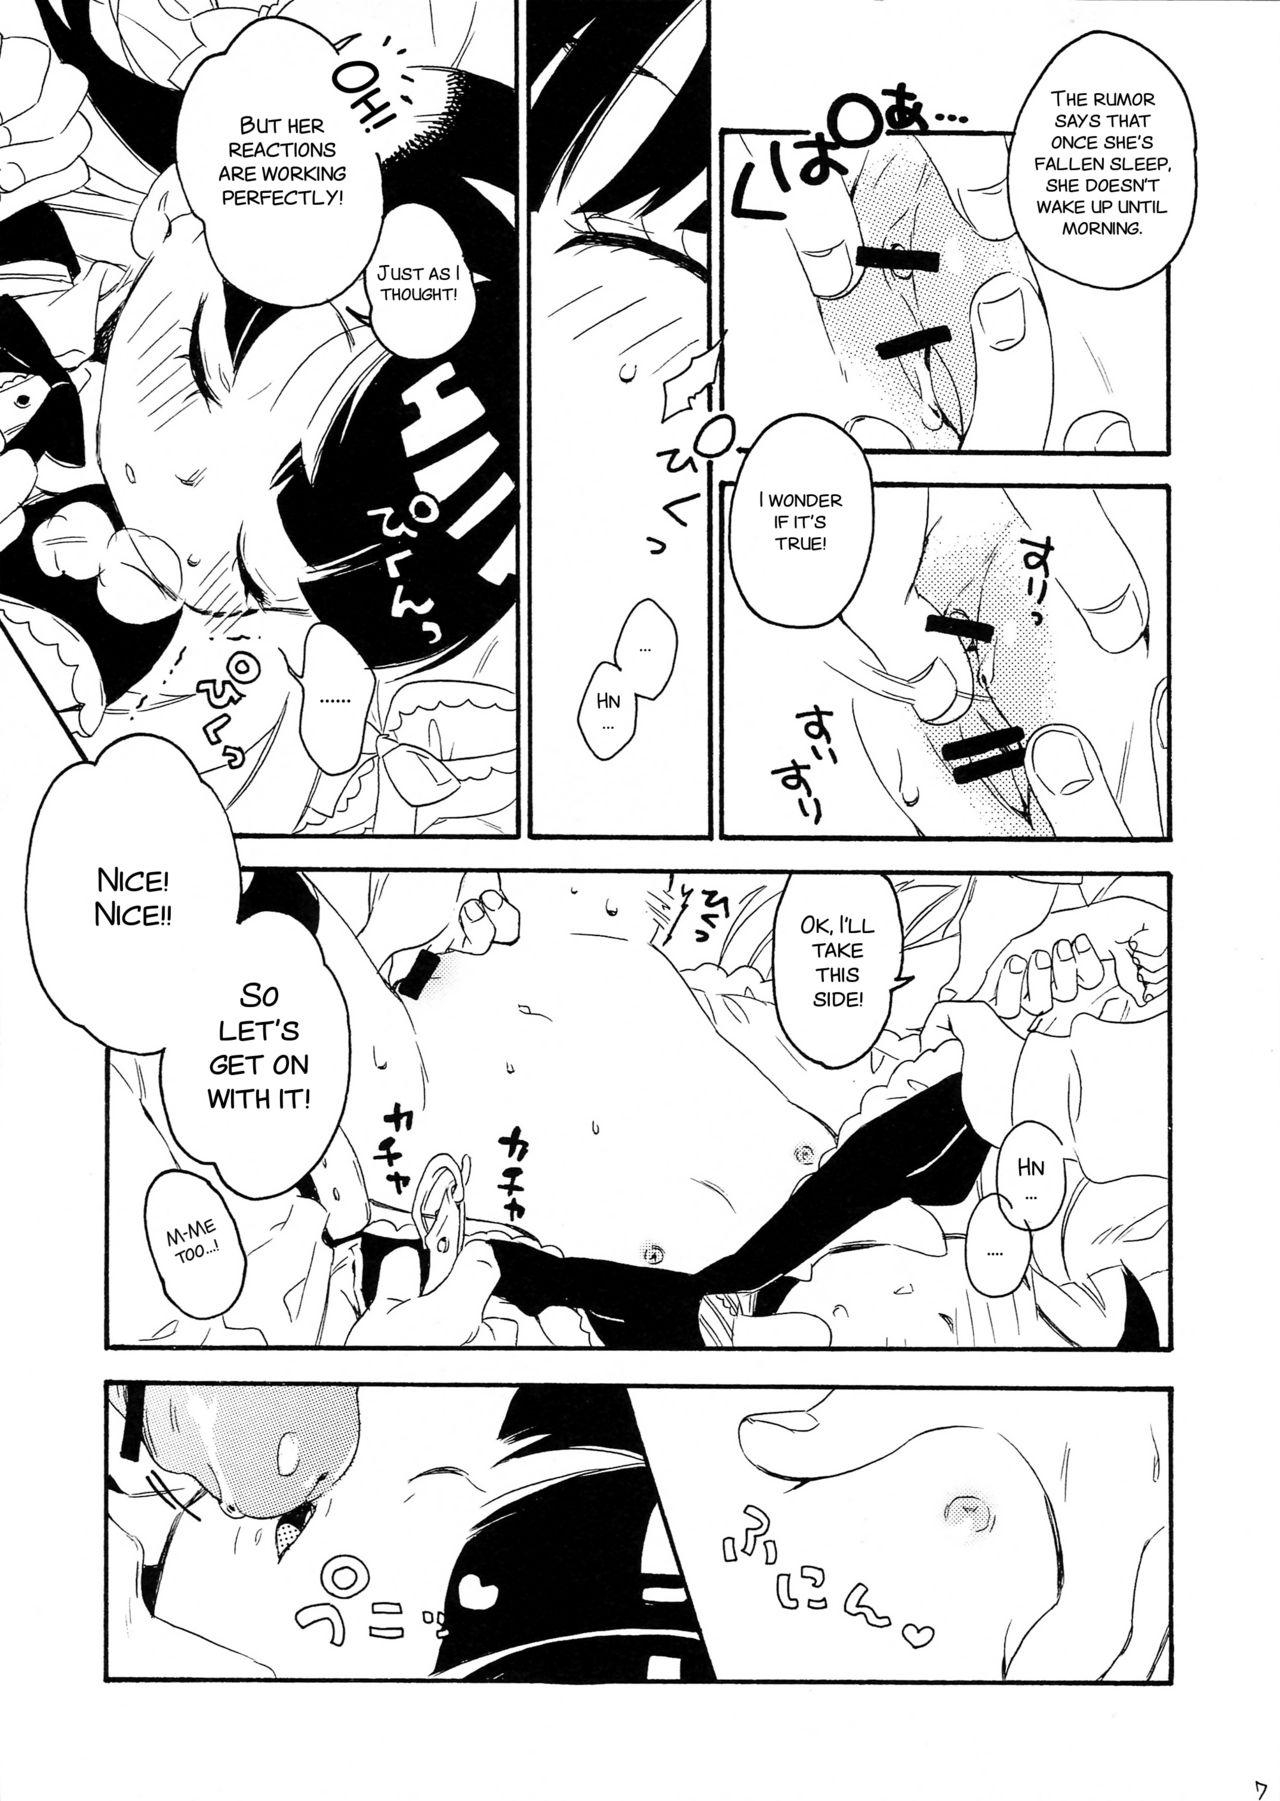 Mamando Stop Daydreaming! - Panty and stocking with garterbelt Teen Blowjob - Page 7